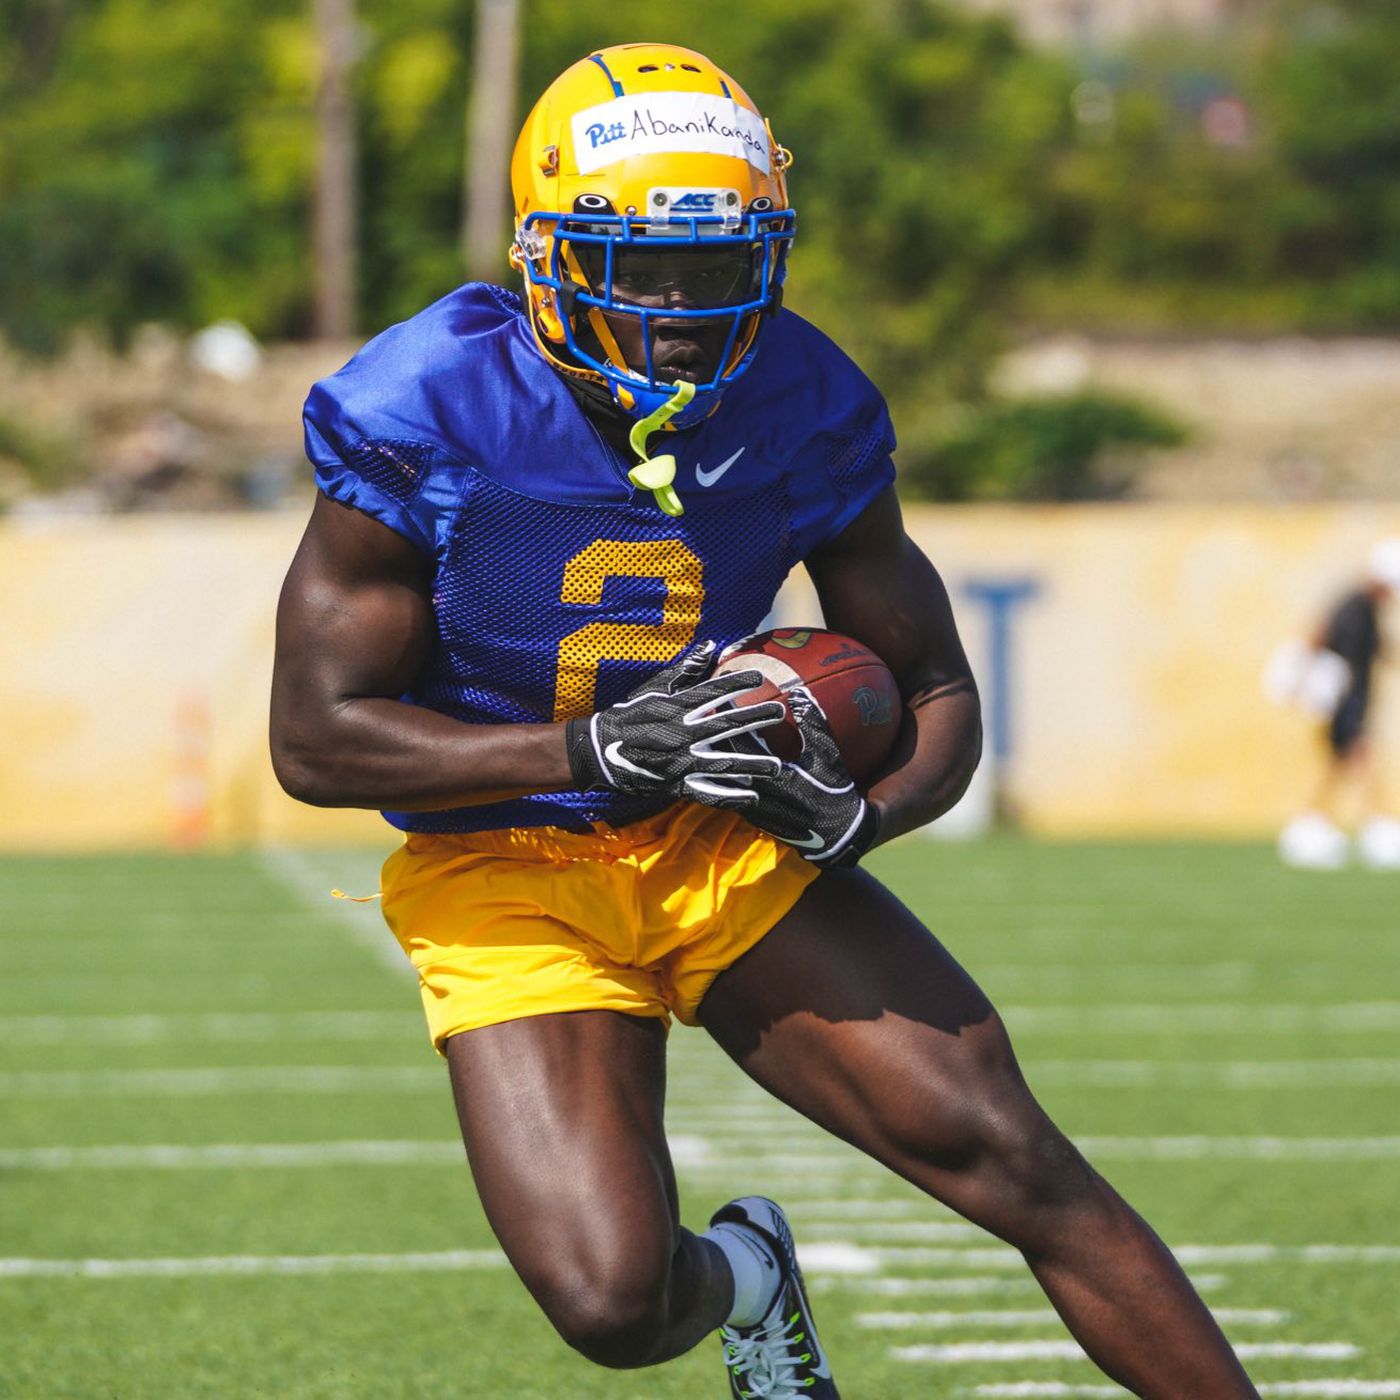 Israel Abanikanda emerges as top running back for Pitt early in training camp - Cardiac Hill